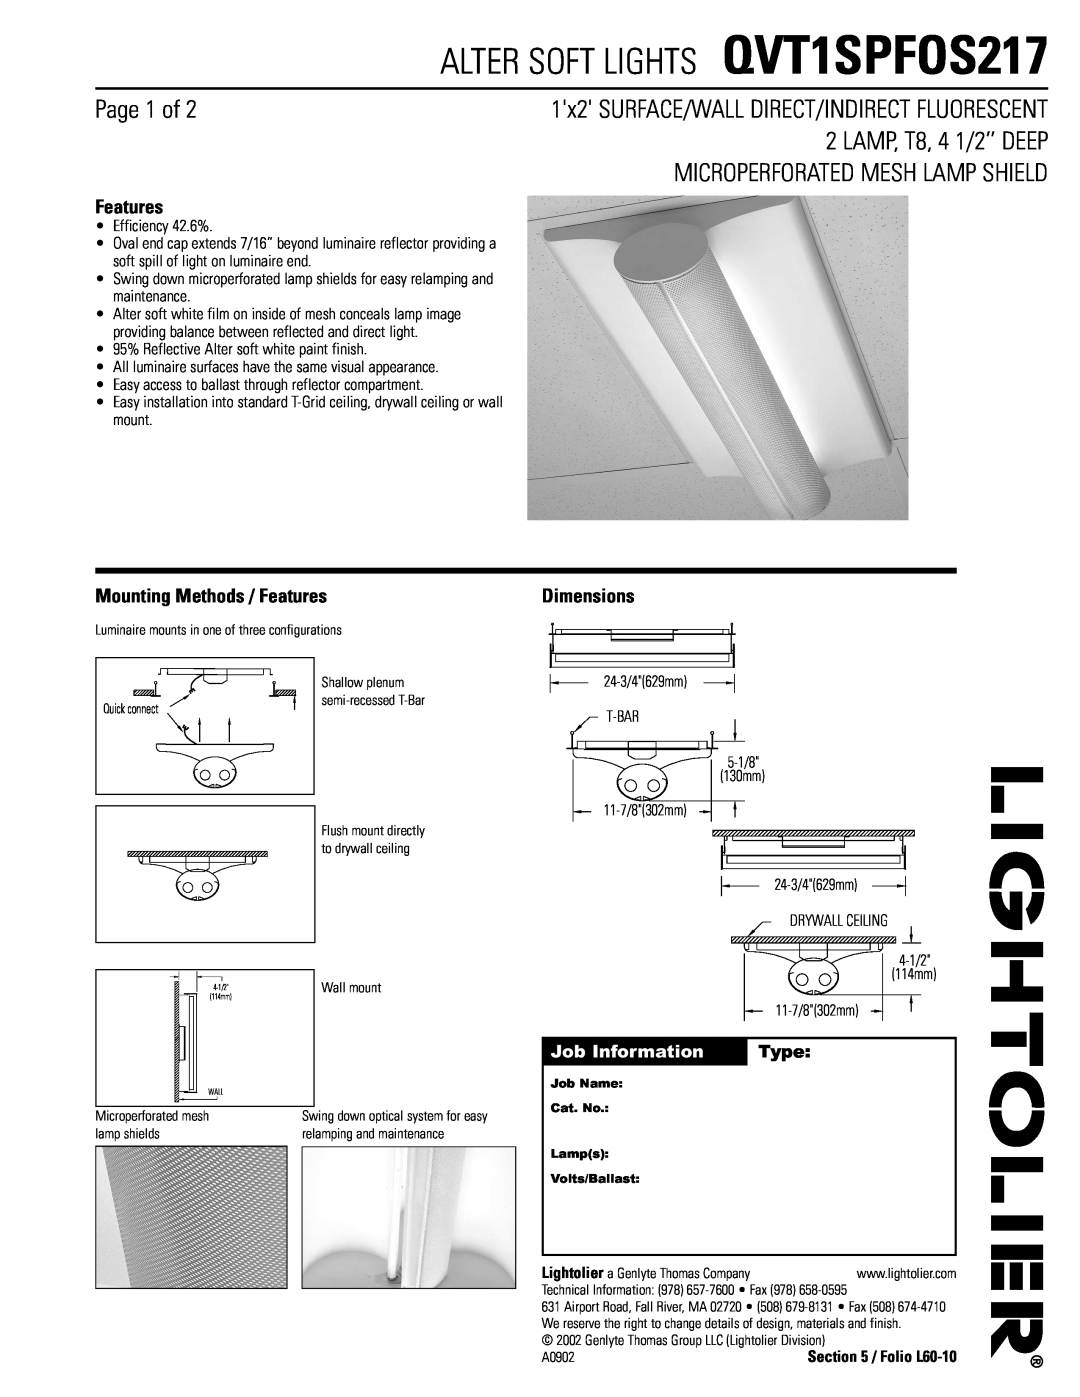 Lightolier dimensions ALTER SOFT LIGHTS QVT1SPFOS217, Page 1 of, LAMP, T8, 4 1/2’’ DEEP, Job Information, Type 